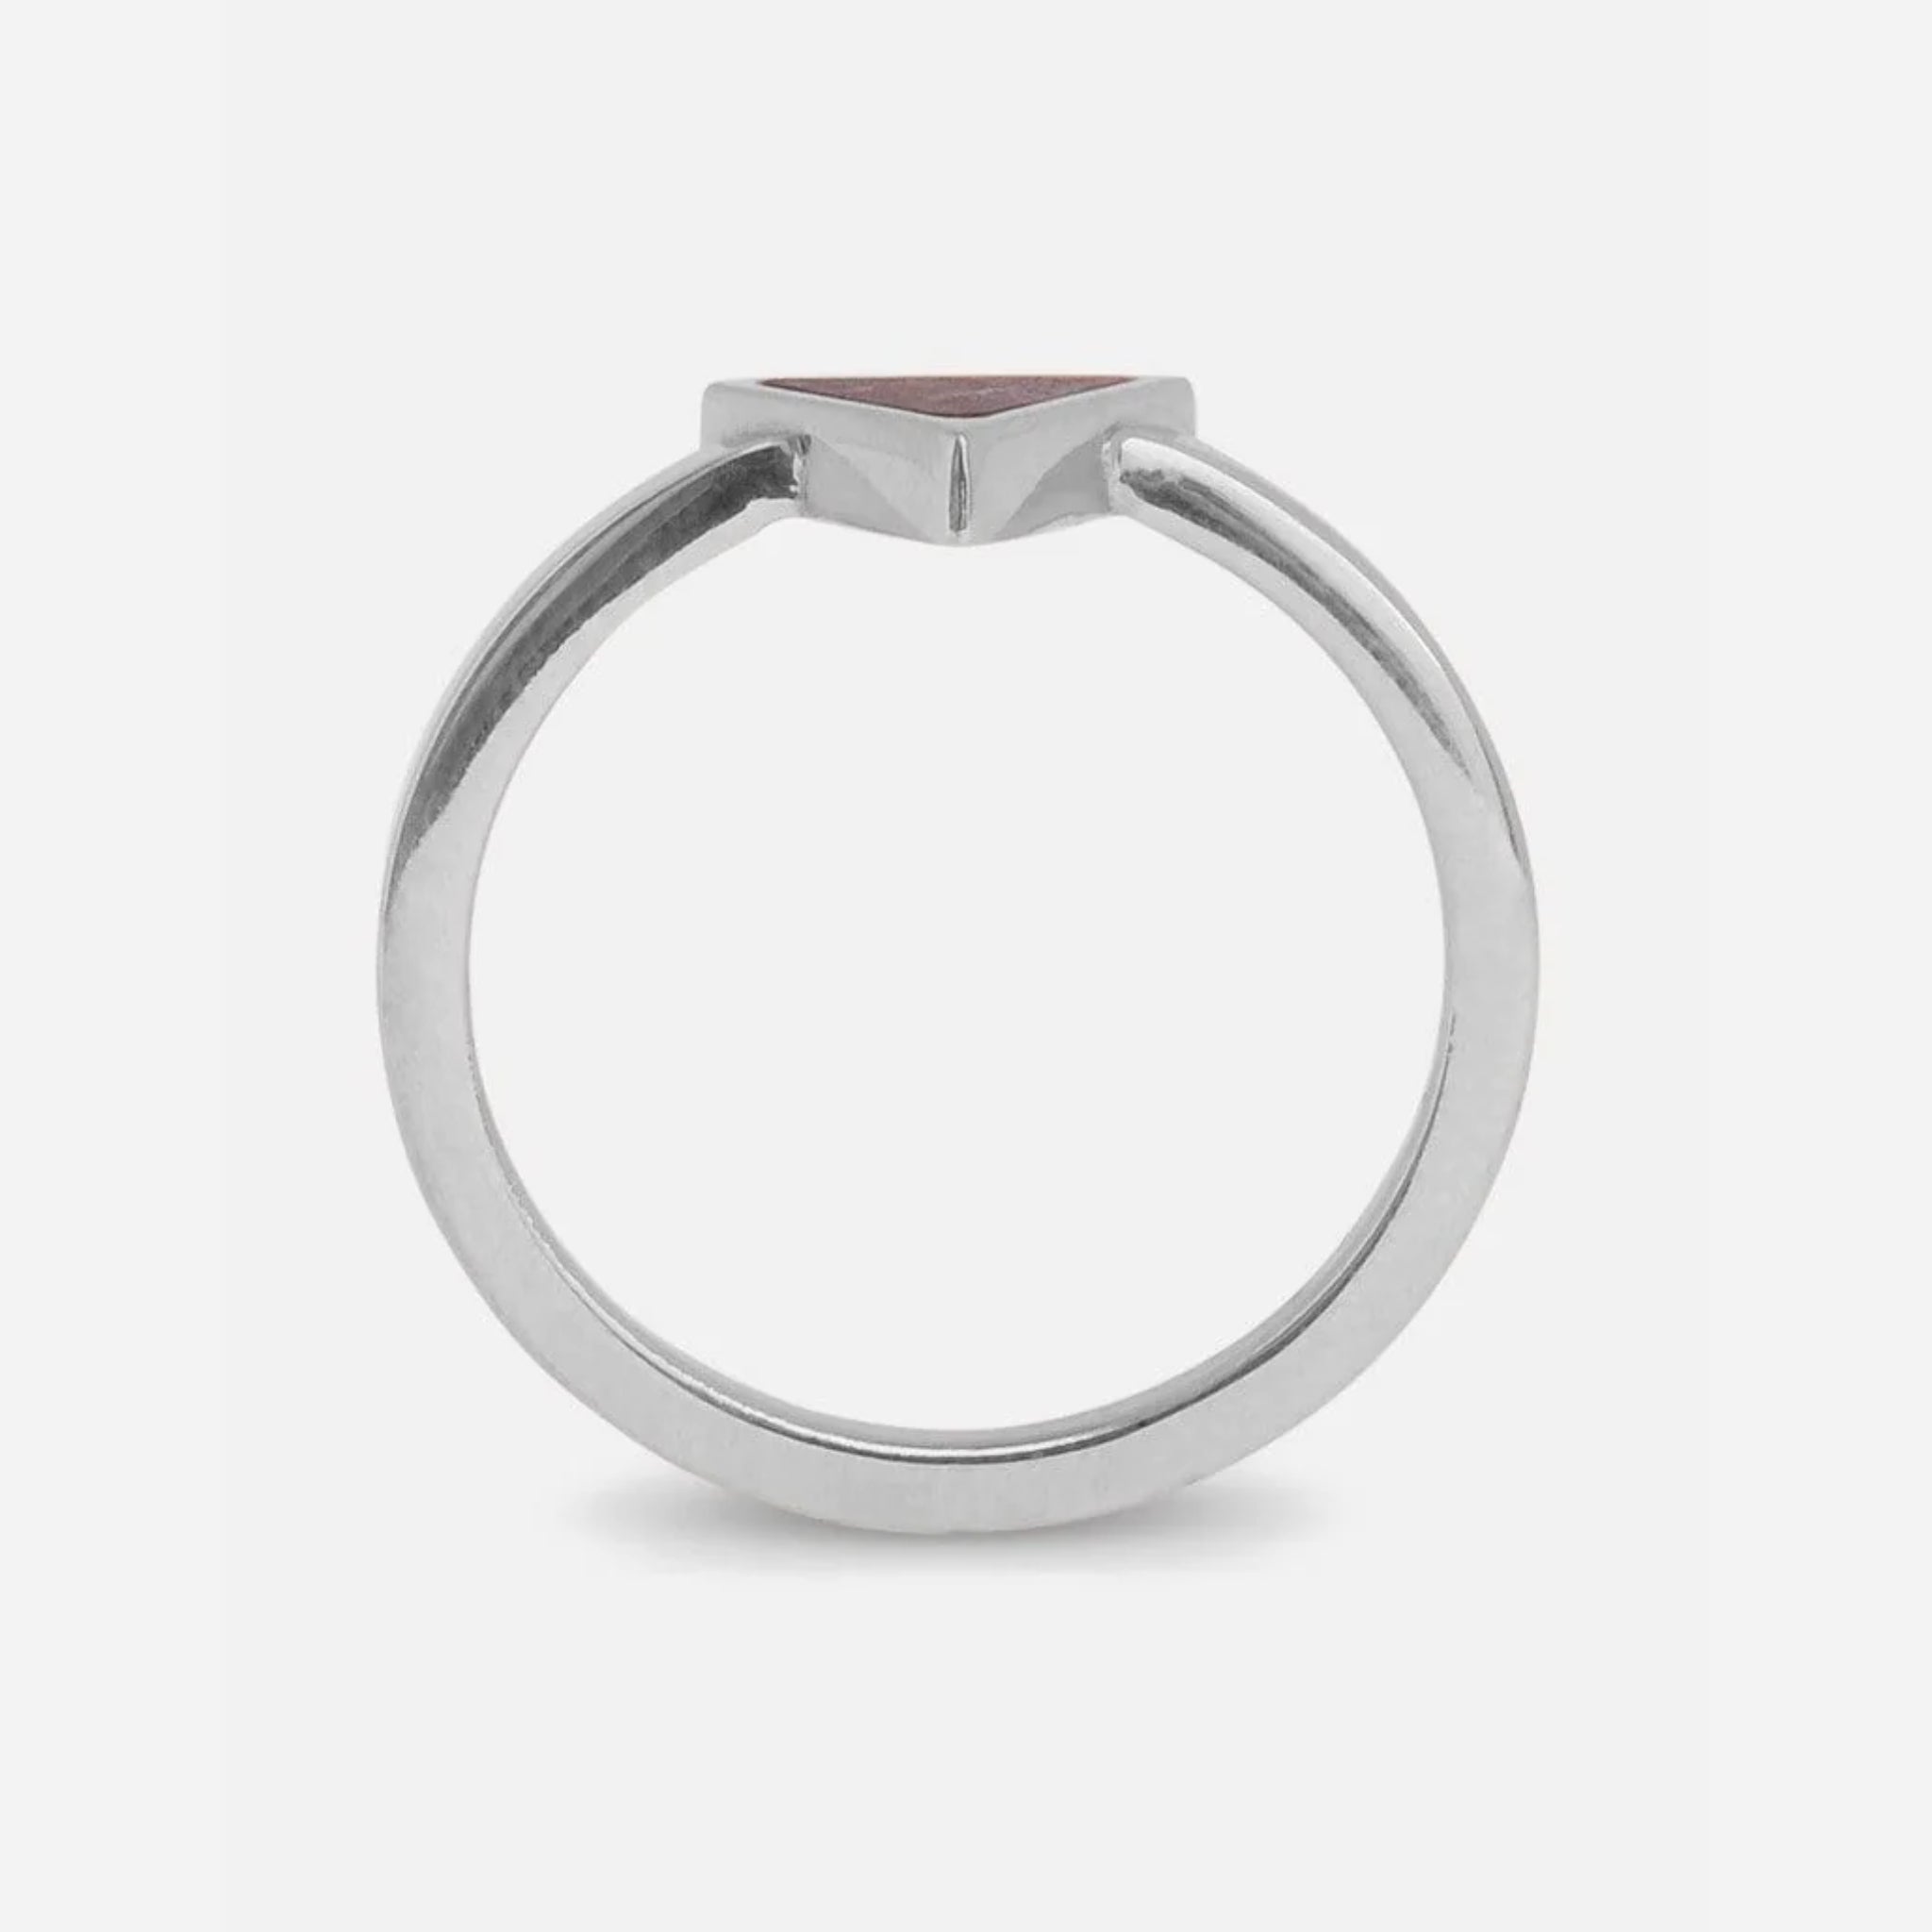 KERBHOLZ Ring "TRIANGLE RING"